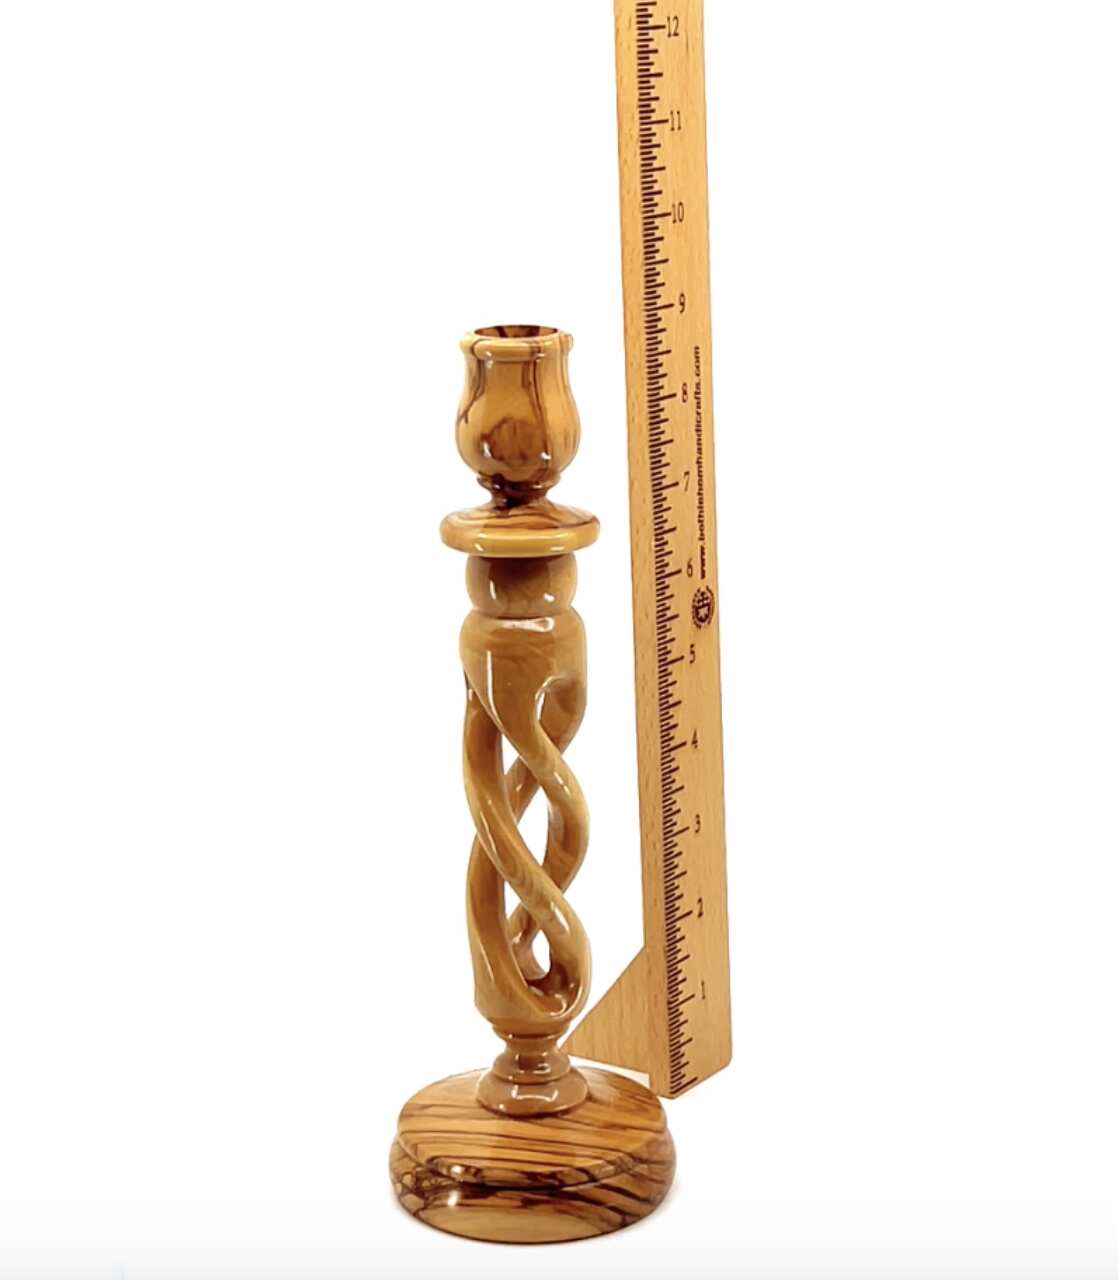 Candle Holder with Hollow Twist, 9.3" Tall from Holy Land Olive Wood